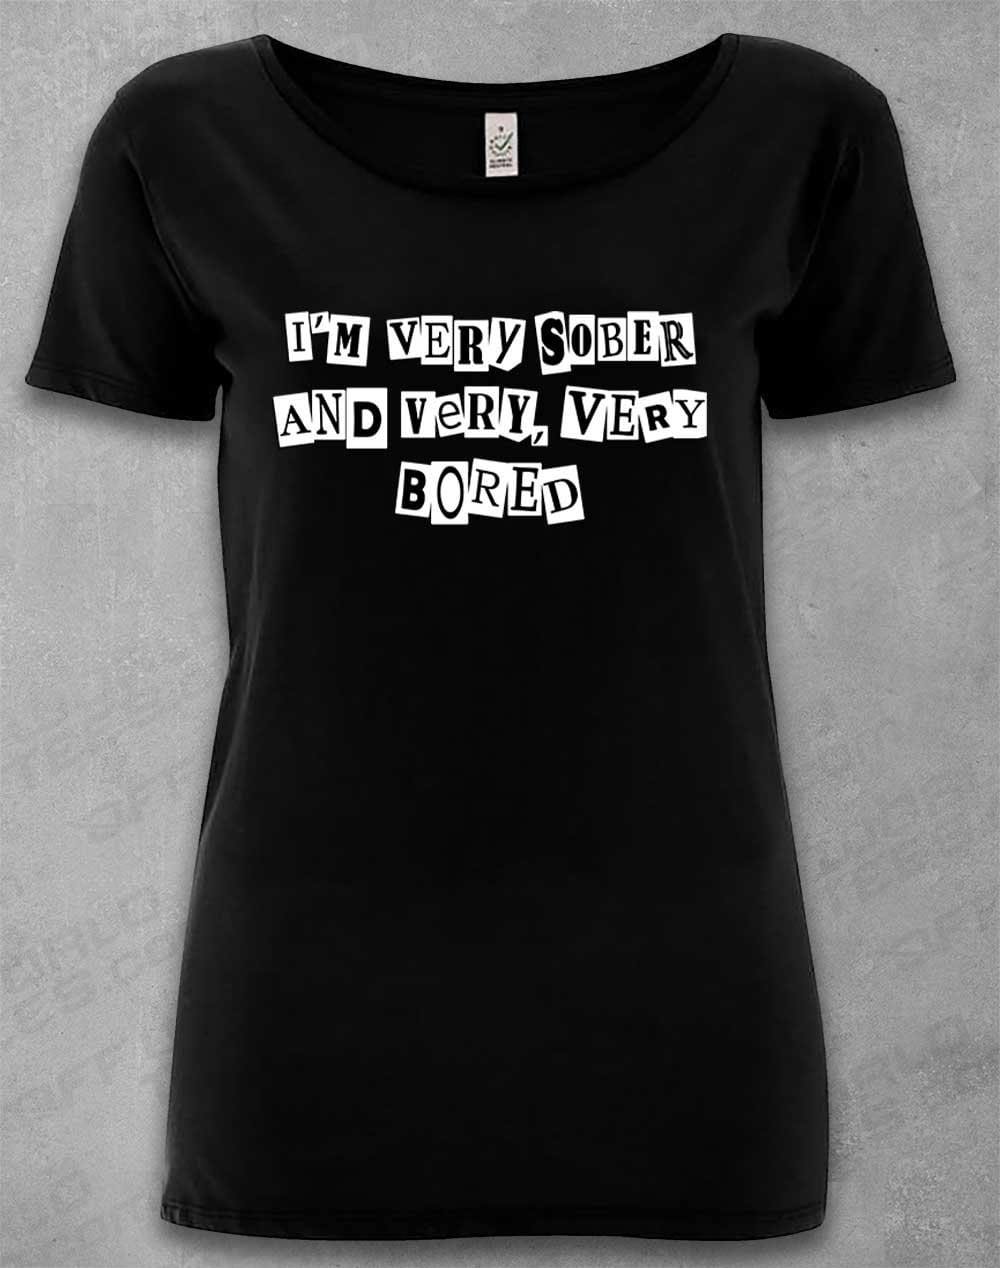 DELUXE I'm Very Sober and Very Very Bored Organic Scoop Neck T-Shirt 8-10 / Black  - Off World Tees